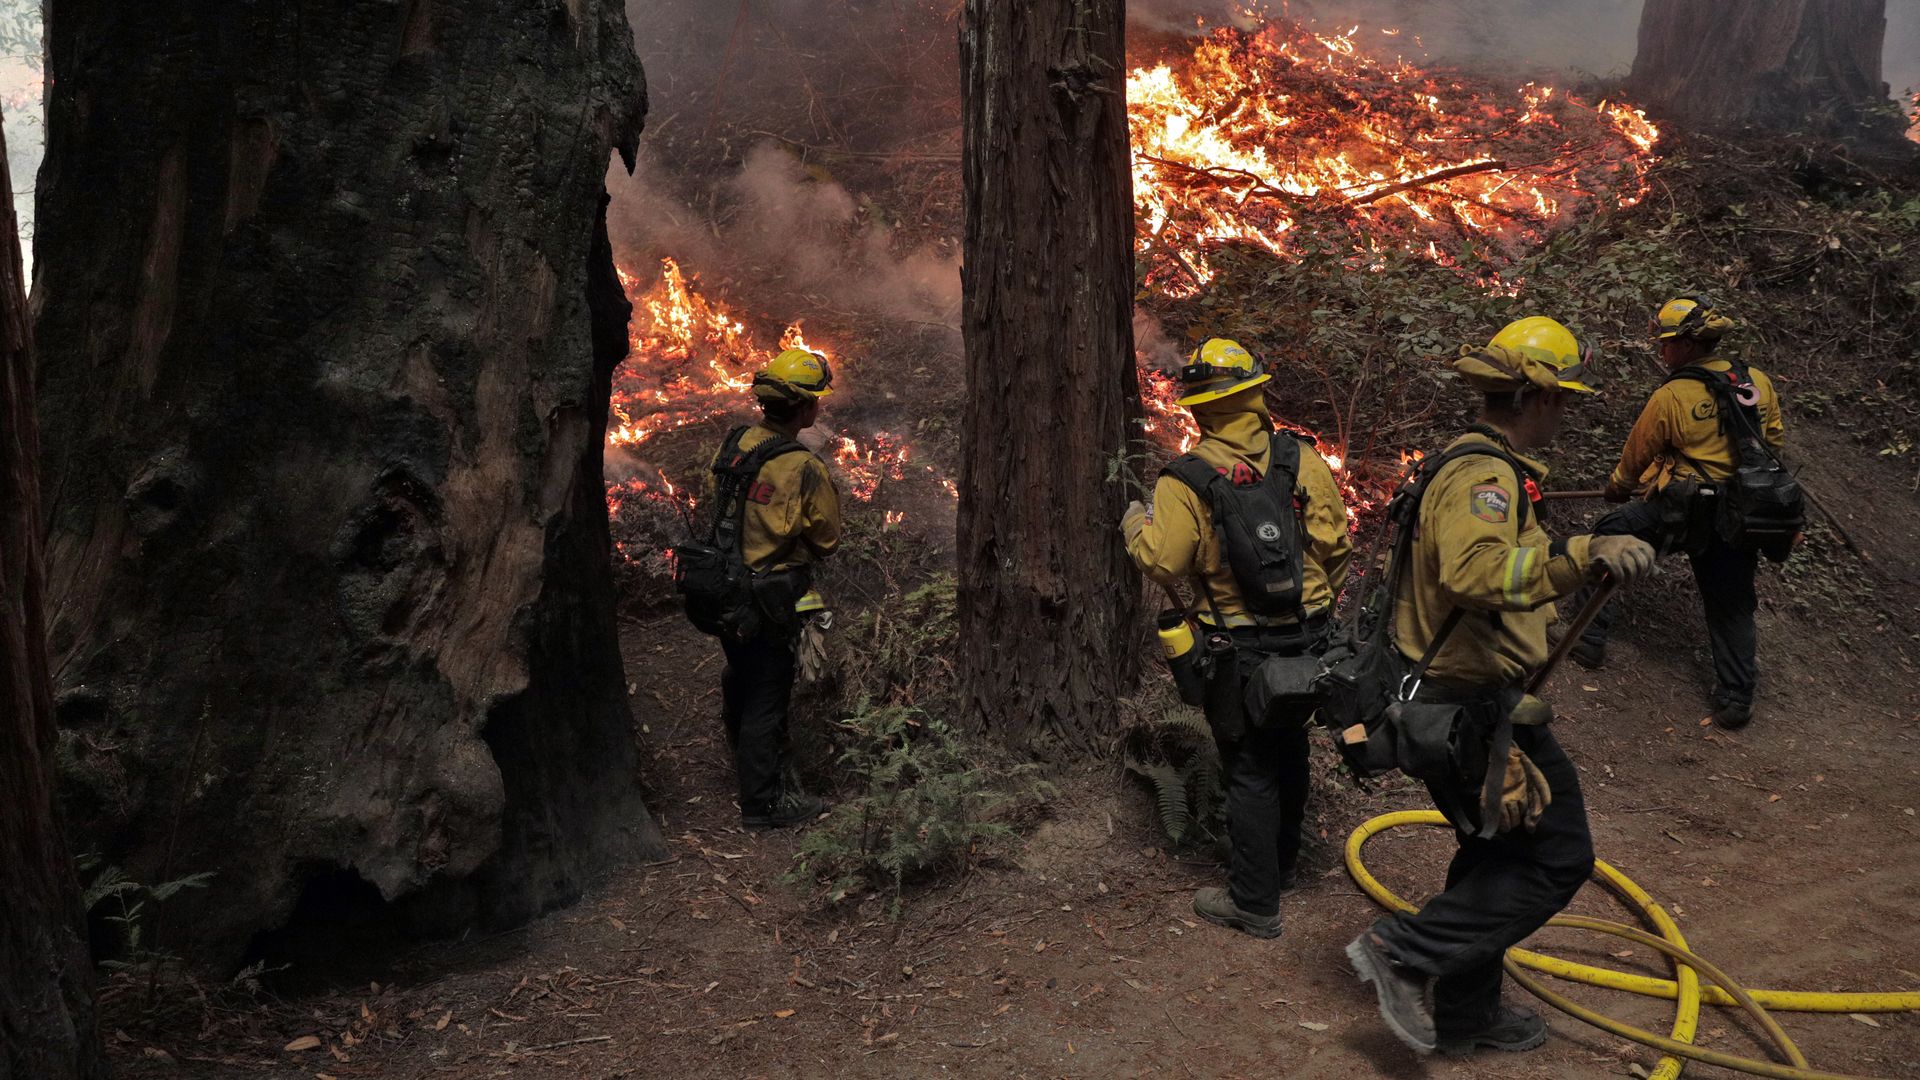 Calfire firefighters monitor a backfire as they worked the Walbridge fire in Armstrong Redwoods State Reserve protecting the heritage trees in Guerneville, Calif., on Tuesday, August 25